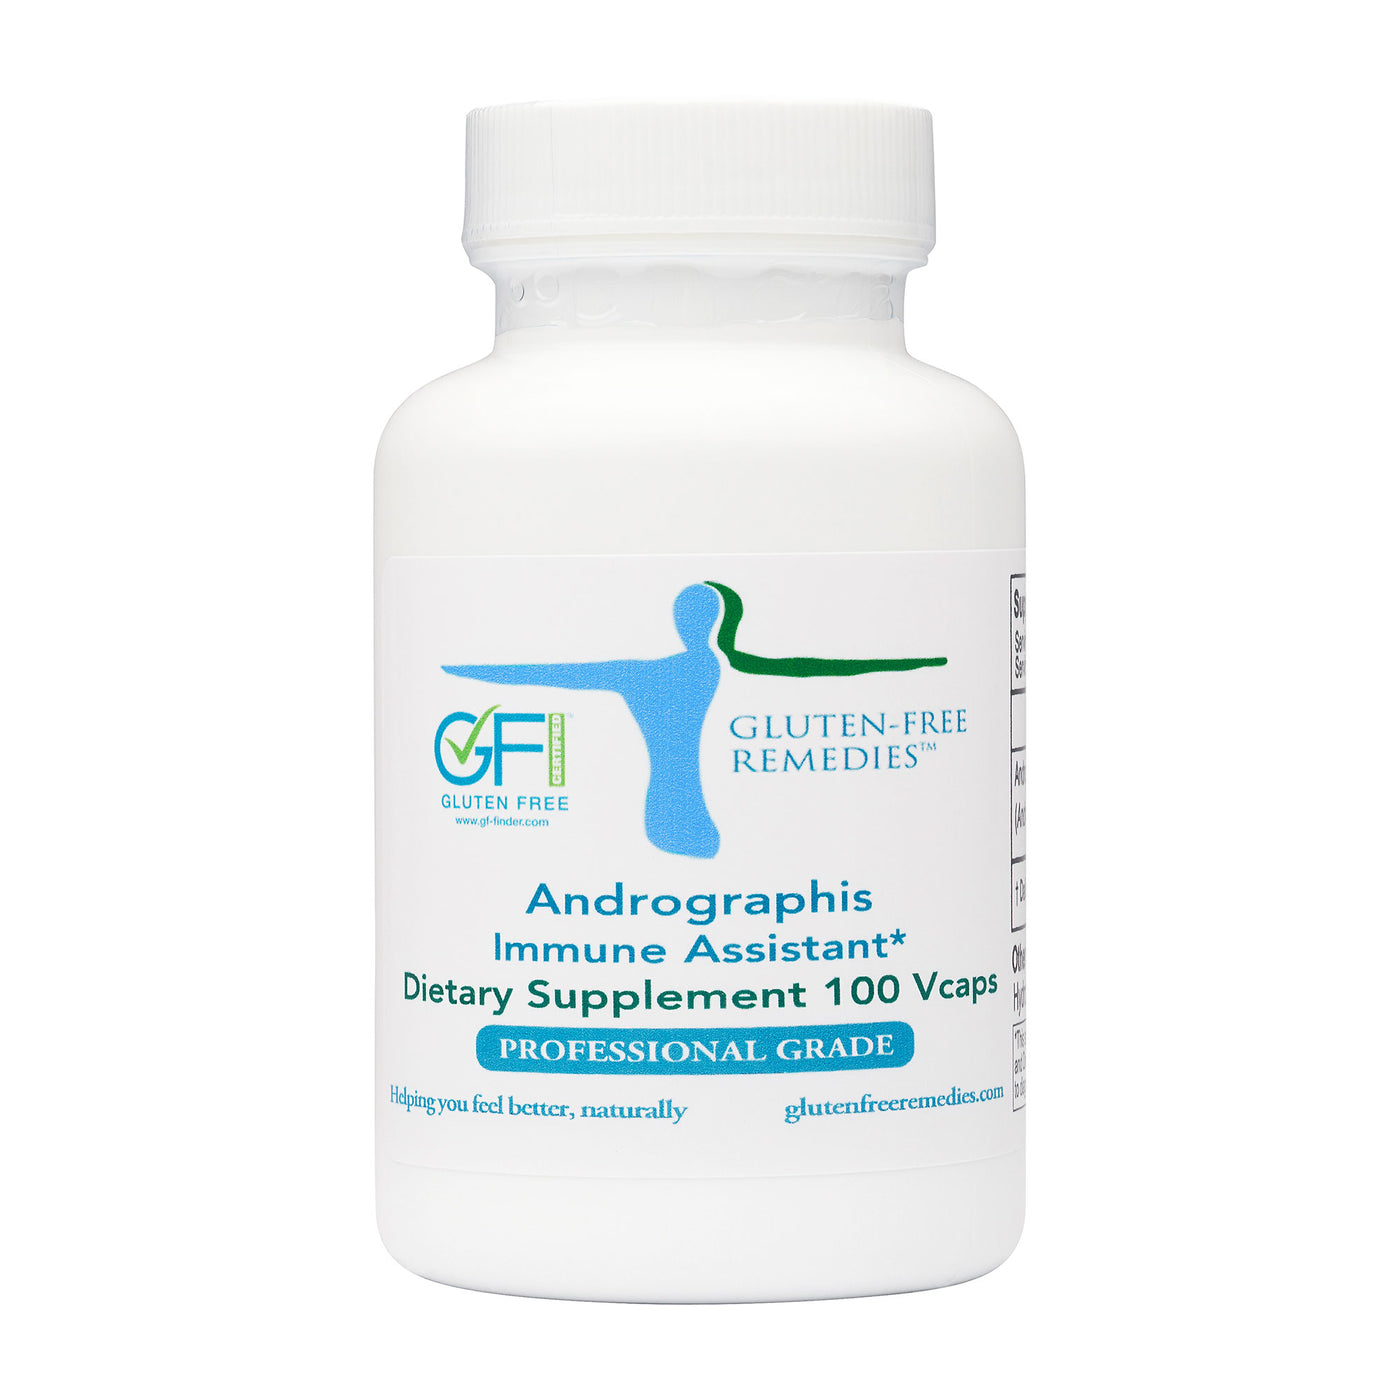 Gluten Free Remedies Andrographis bottle